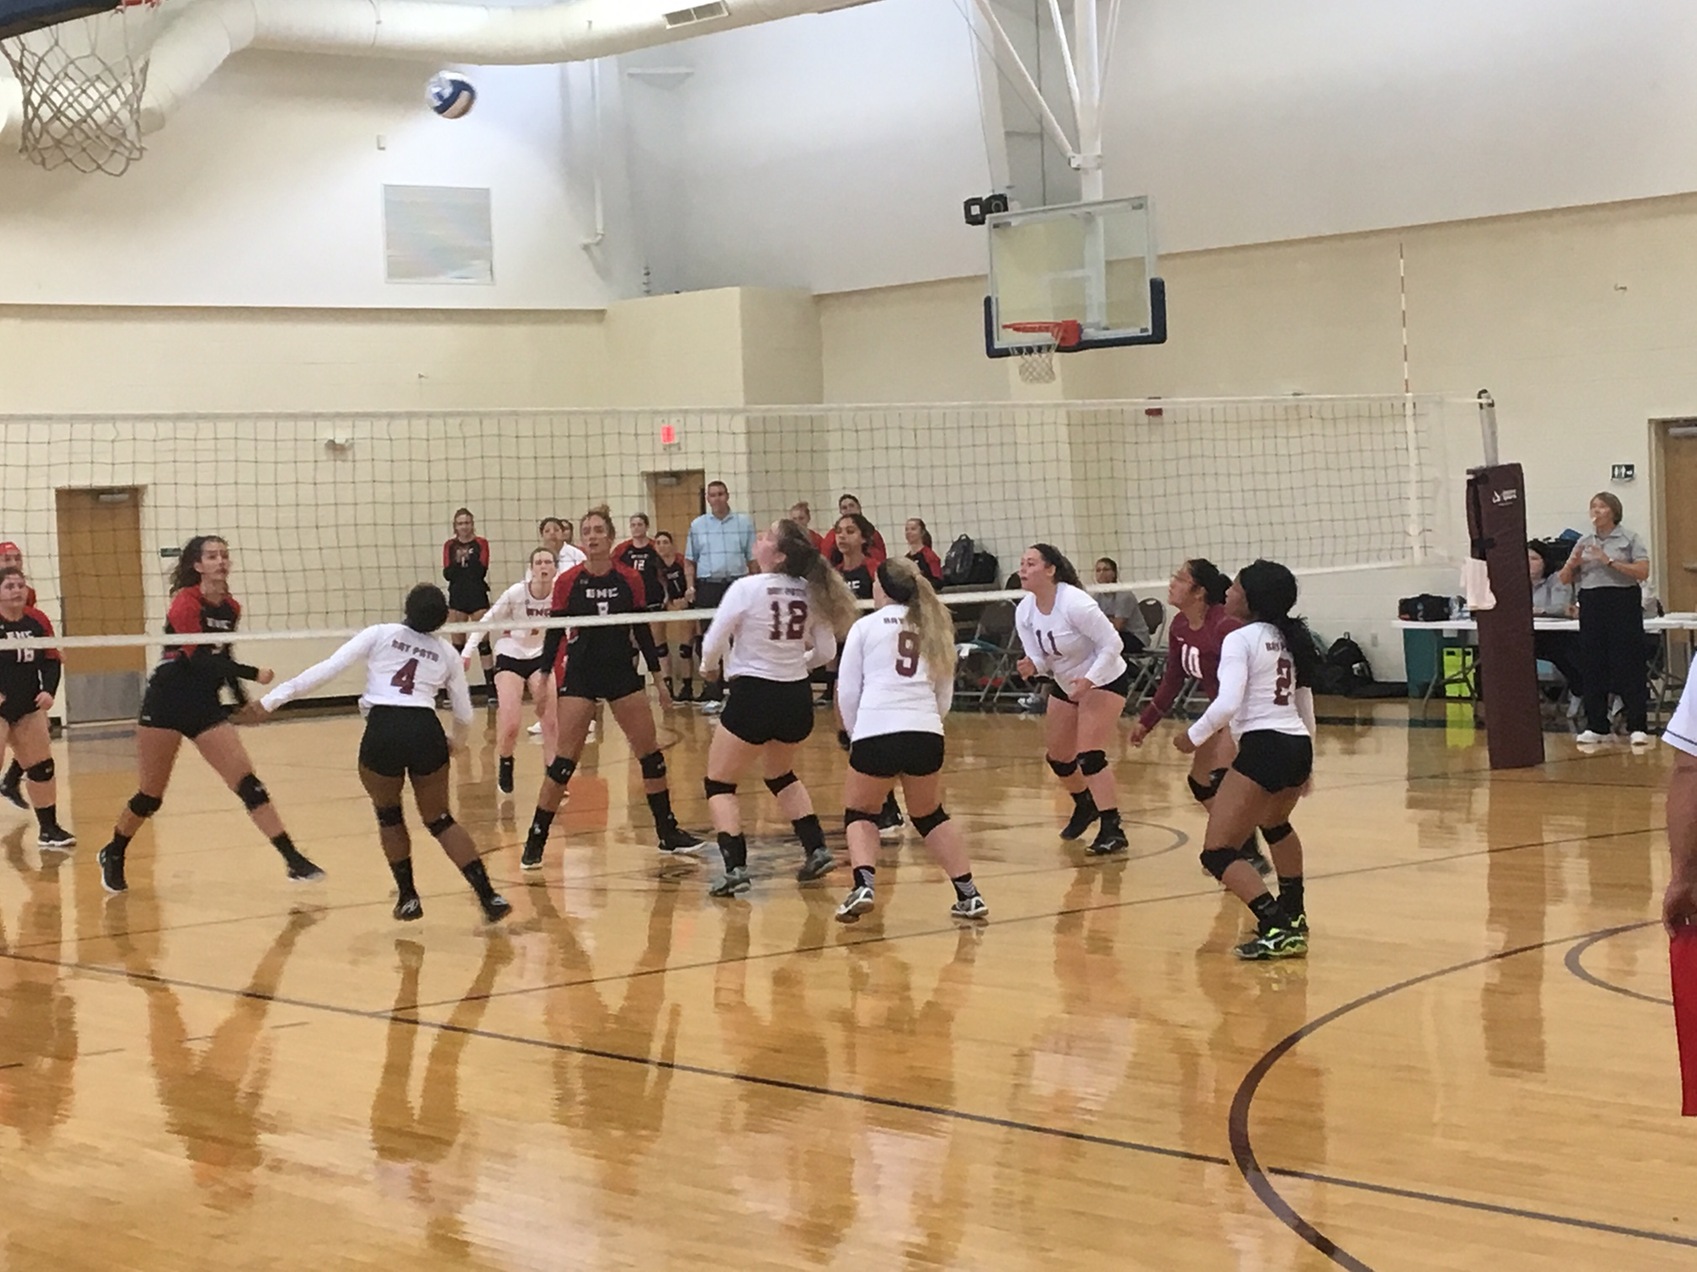 WILDCATS SINK MARINERS 3-1 IN NECC VOLLEYBALL